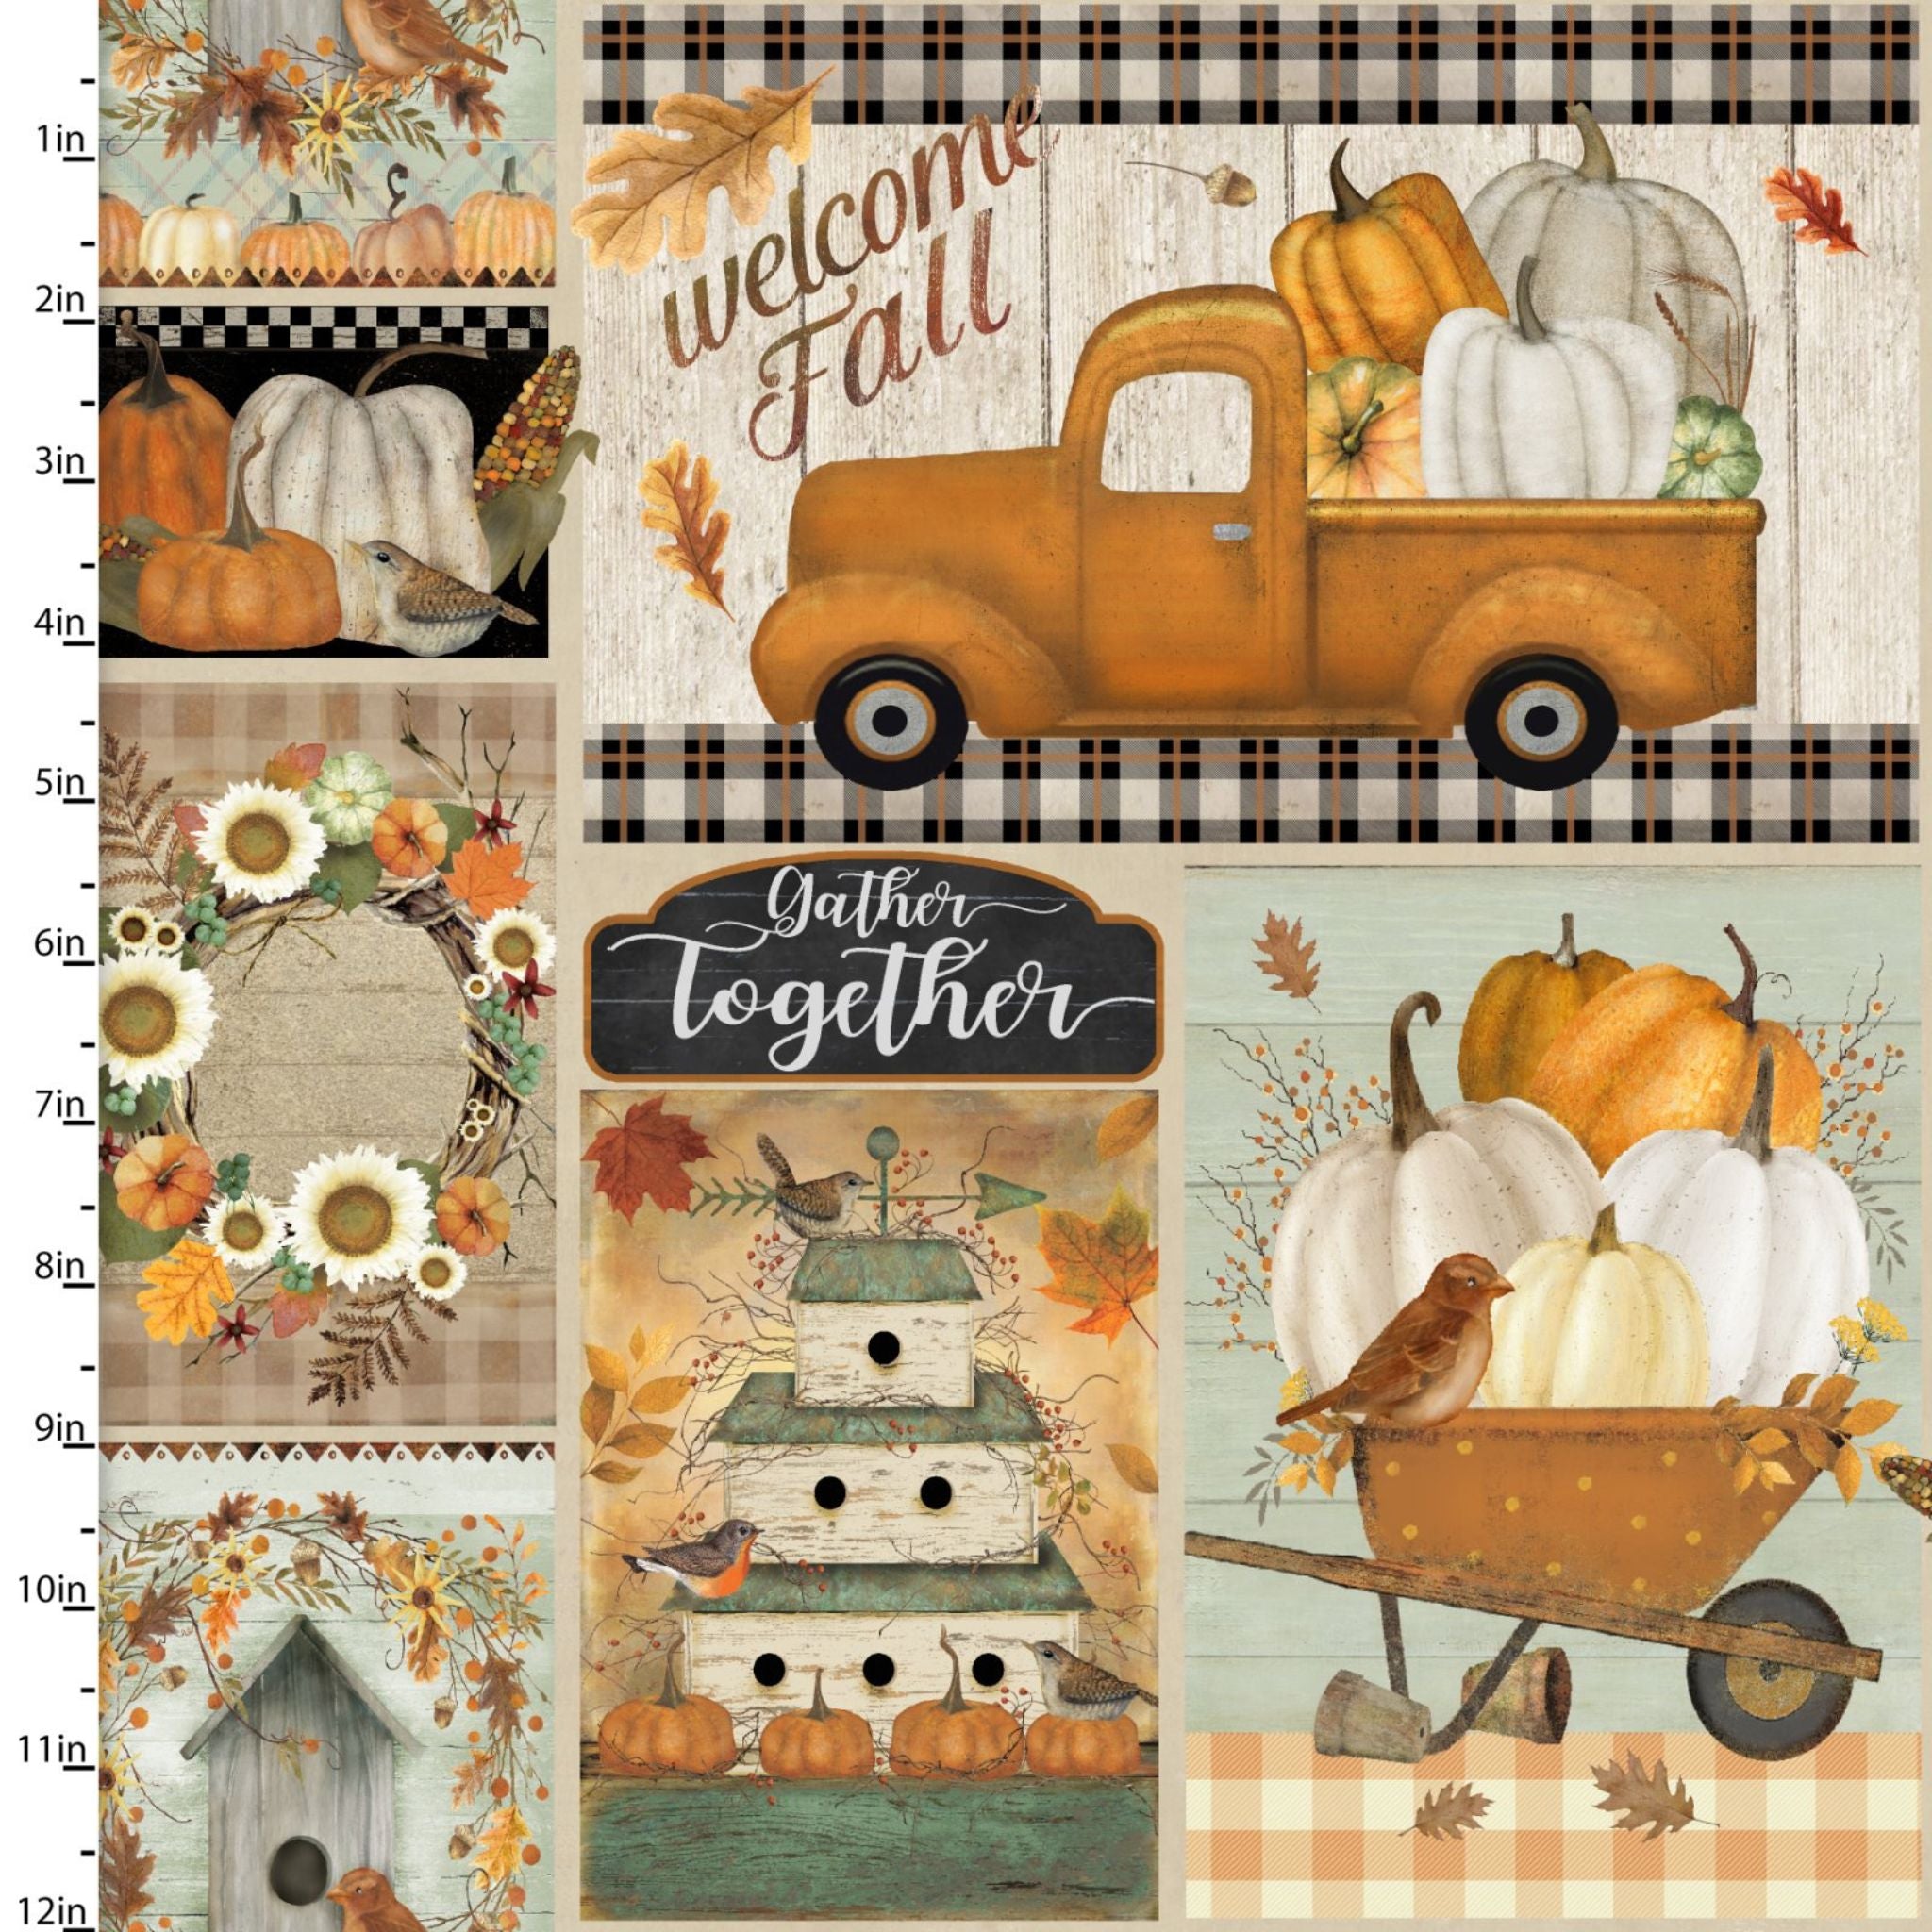 american trucks bursting with pumpkins with bird boxes - The Pick of the Patch by 3 Wishes